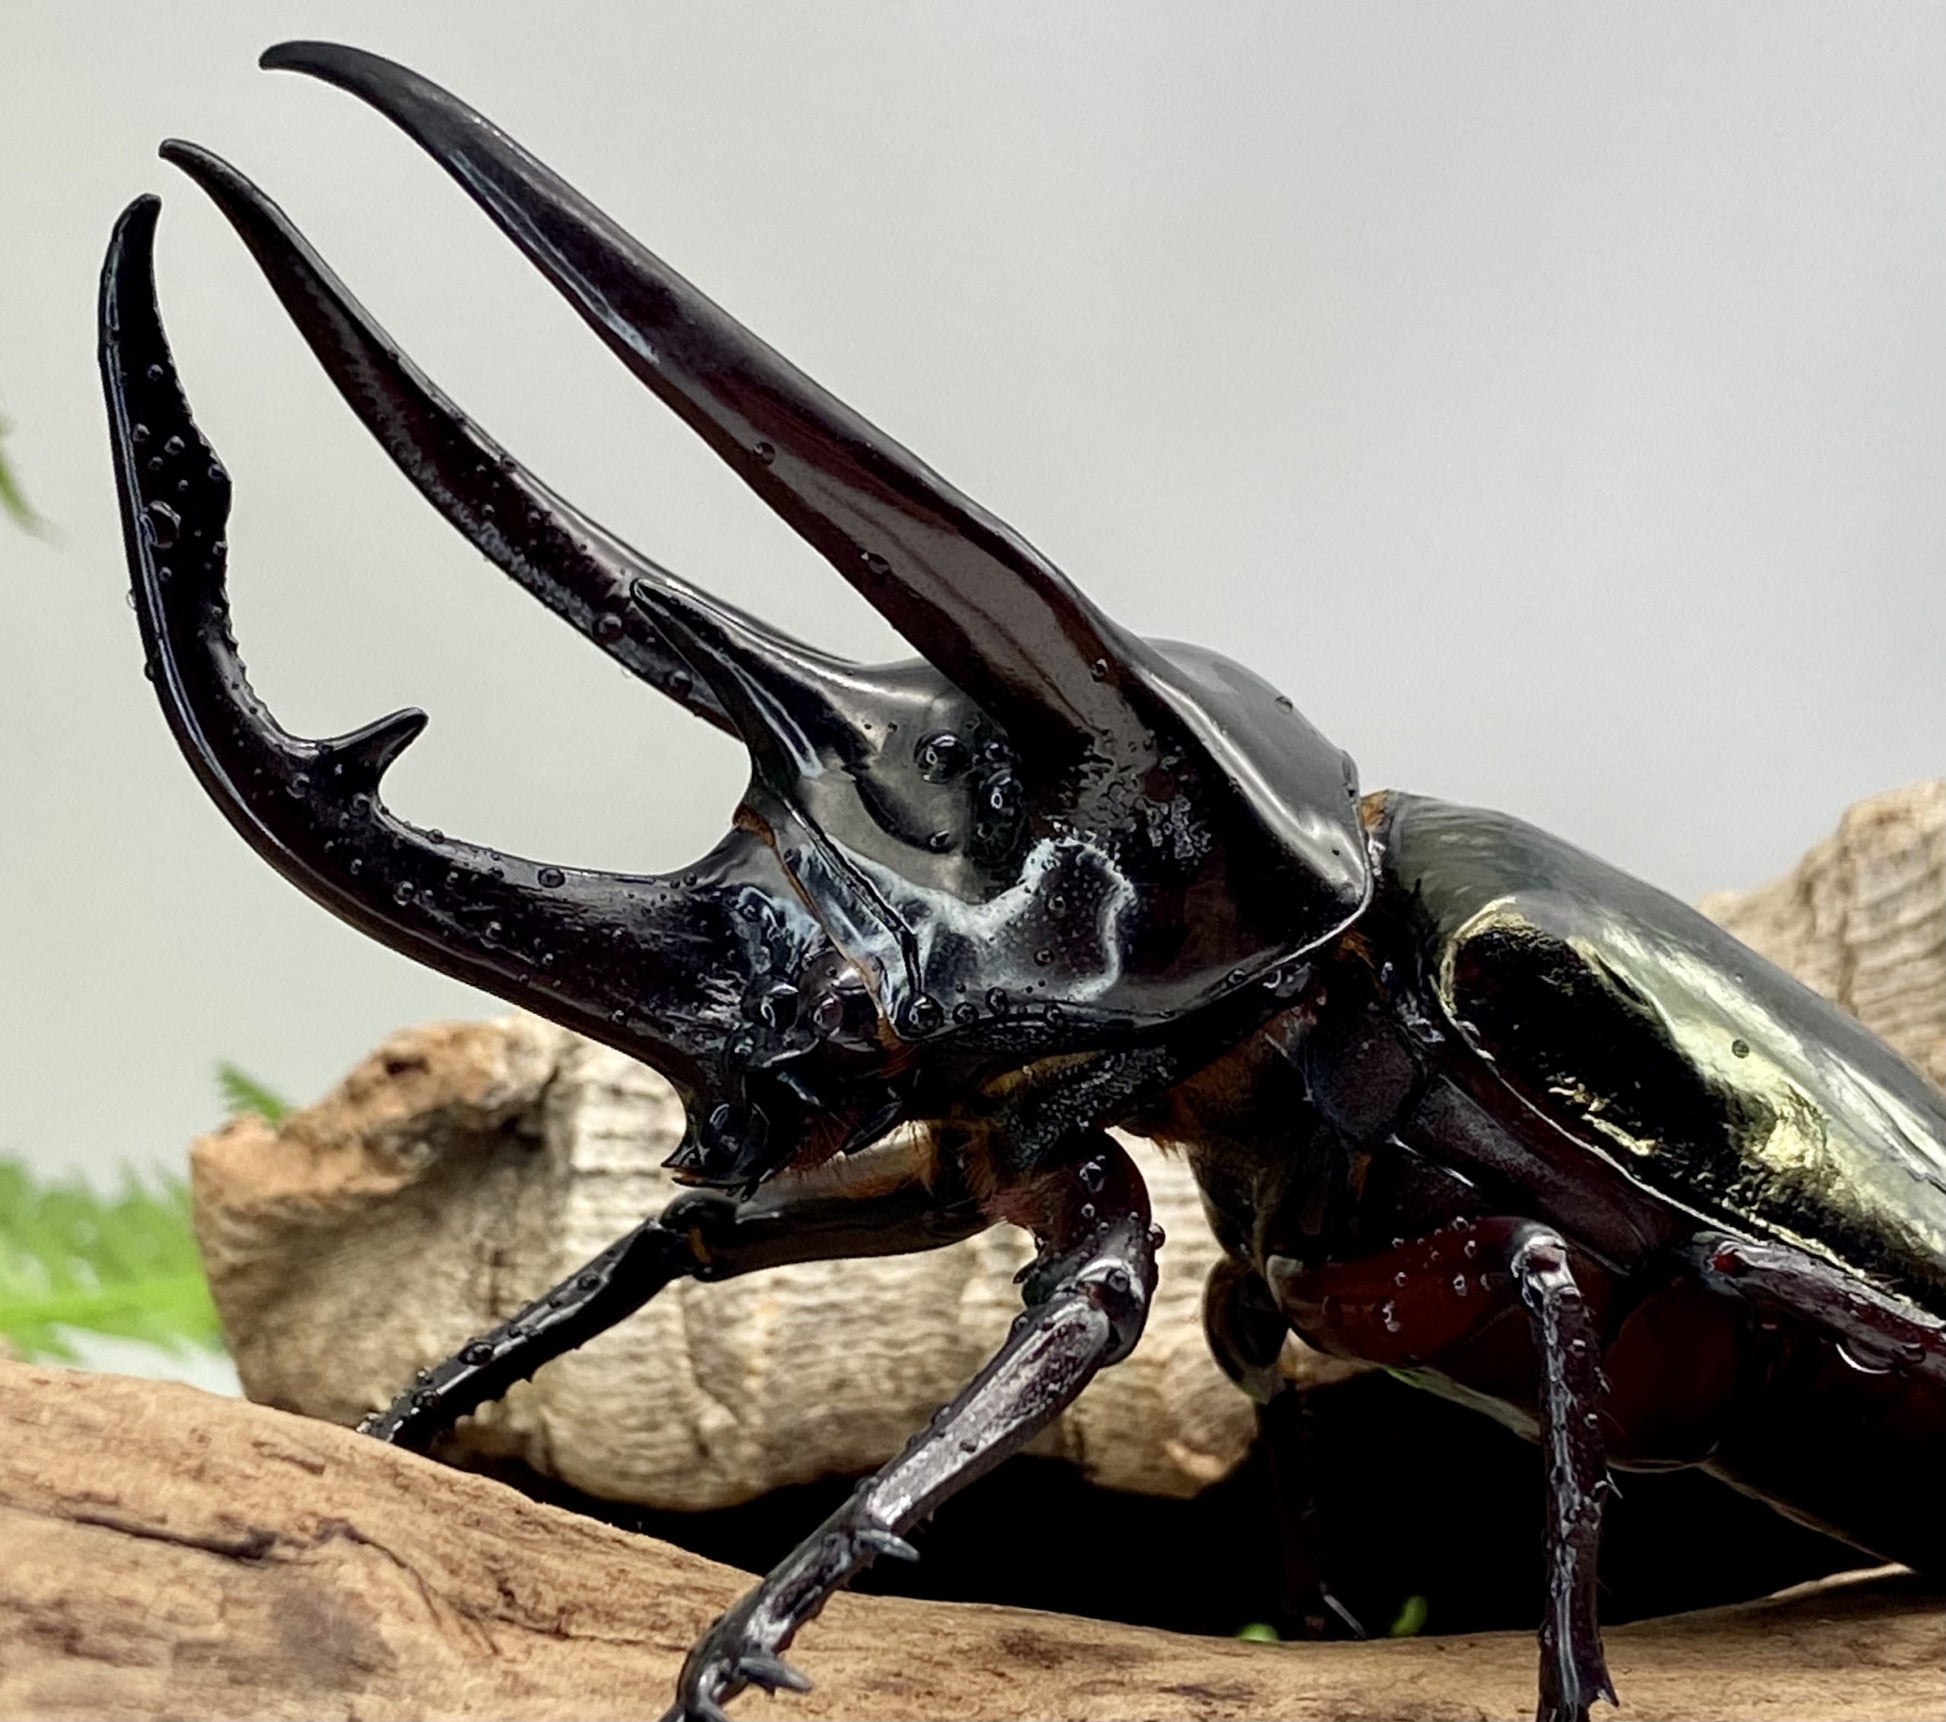 Rhinoceros beetles: one of the strongest insects with horned heads